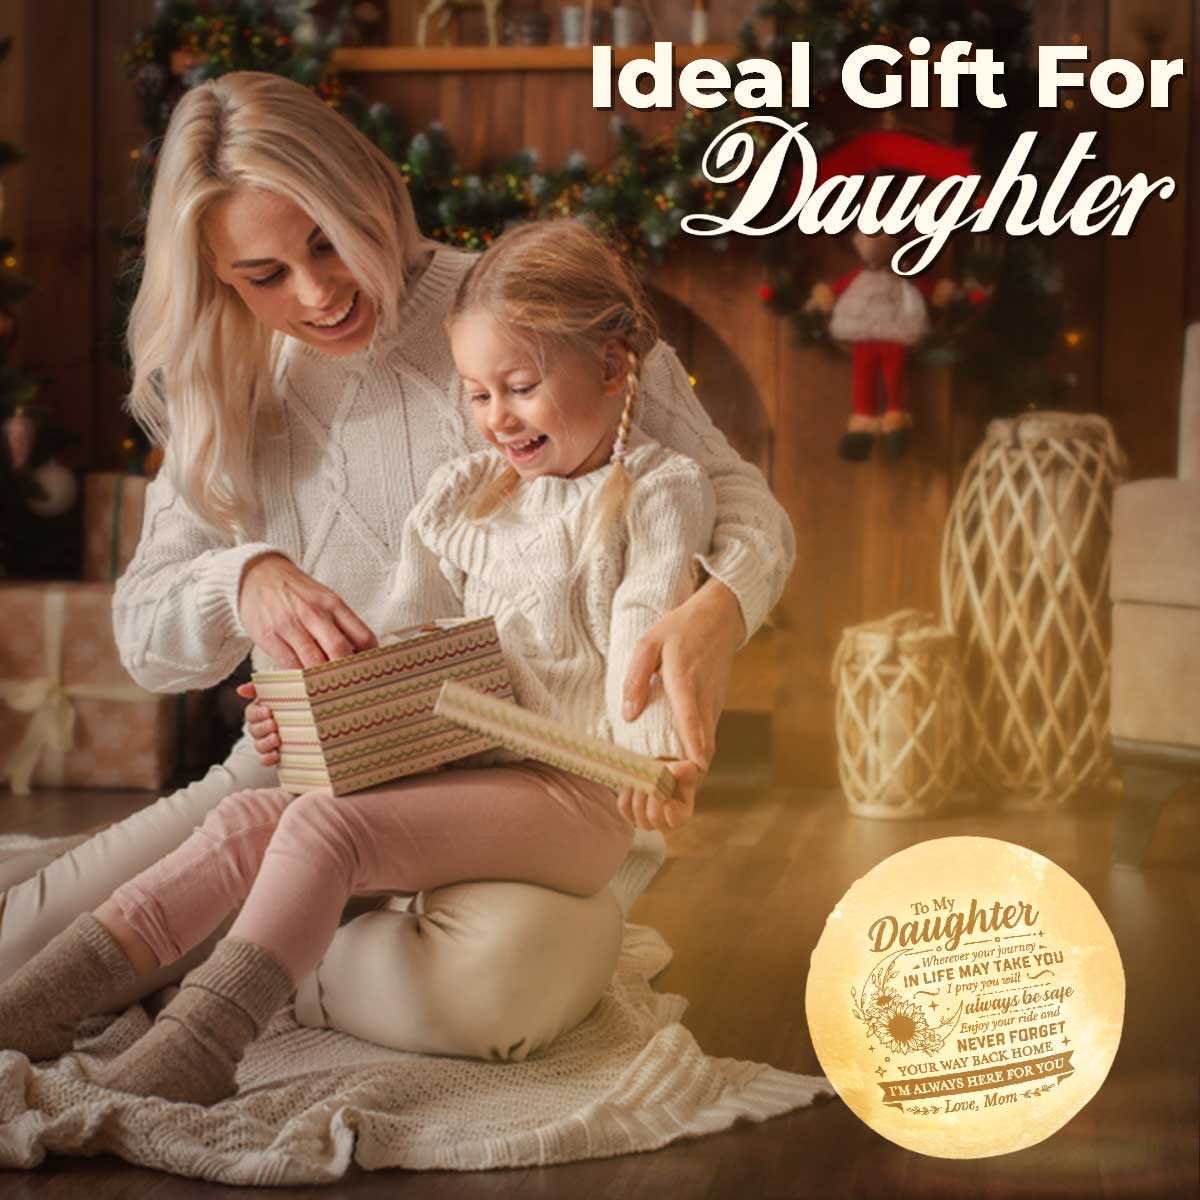 35 Best Gifts for Daughters - Gift Ideas for Her